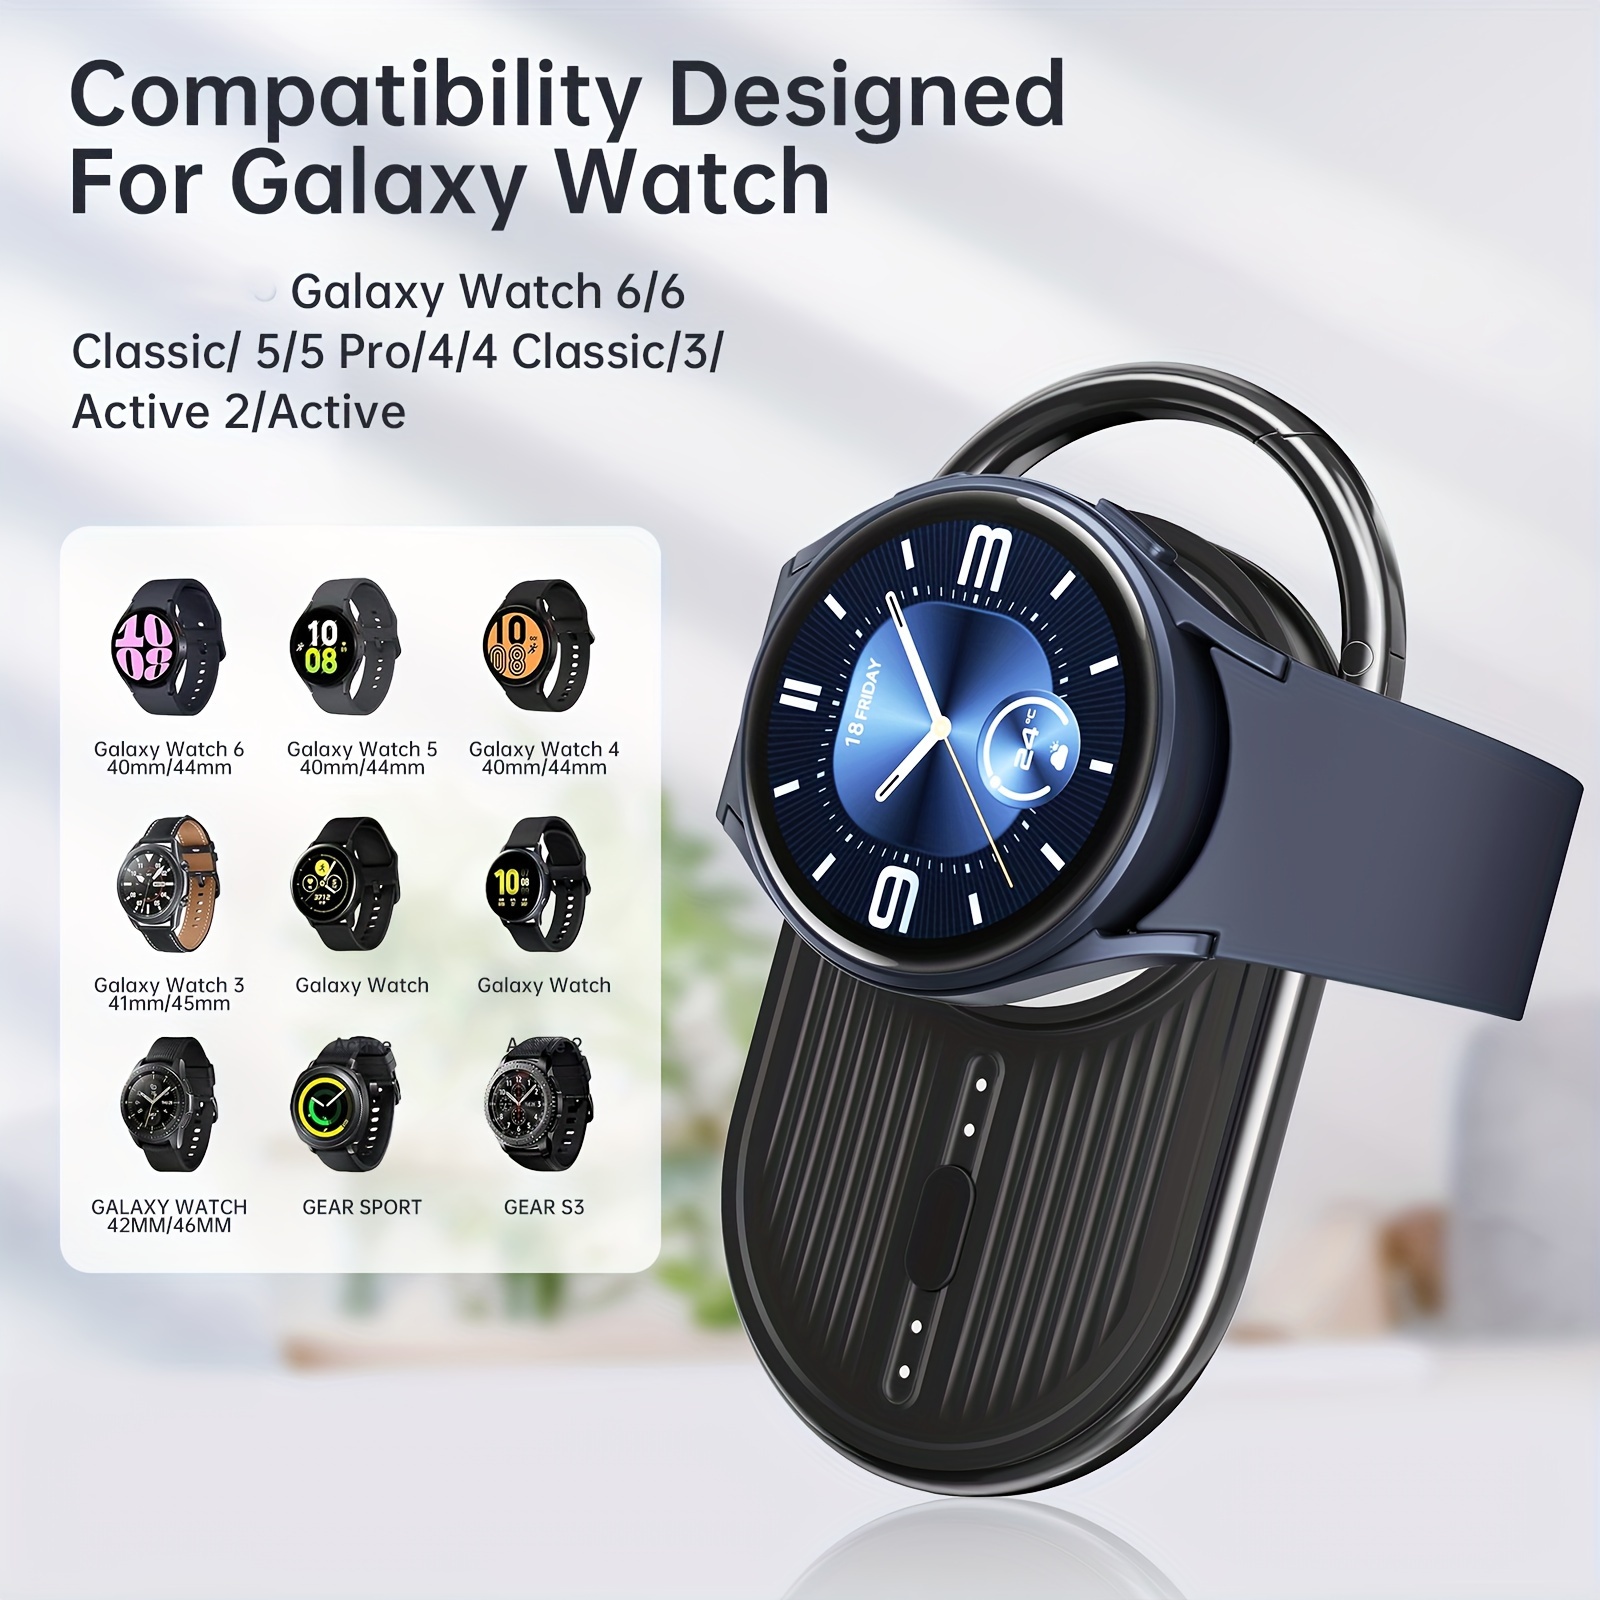 

Watch Charger For Samsung, Portable Charger For Galaxy Watch 6/6 Classic/5/5 Pro/4/4 Classic/3/active 2, Samsung Gear S3/sport Watch, 1200mah Fast Charging/travel/emergency Watch Charger